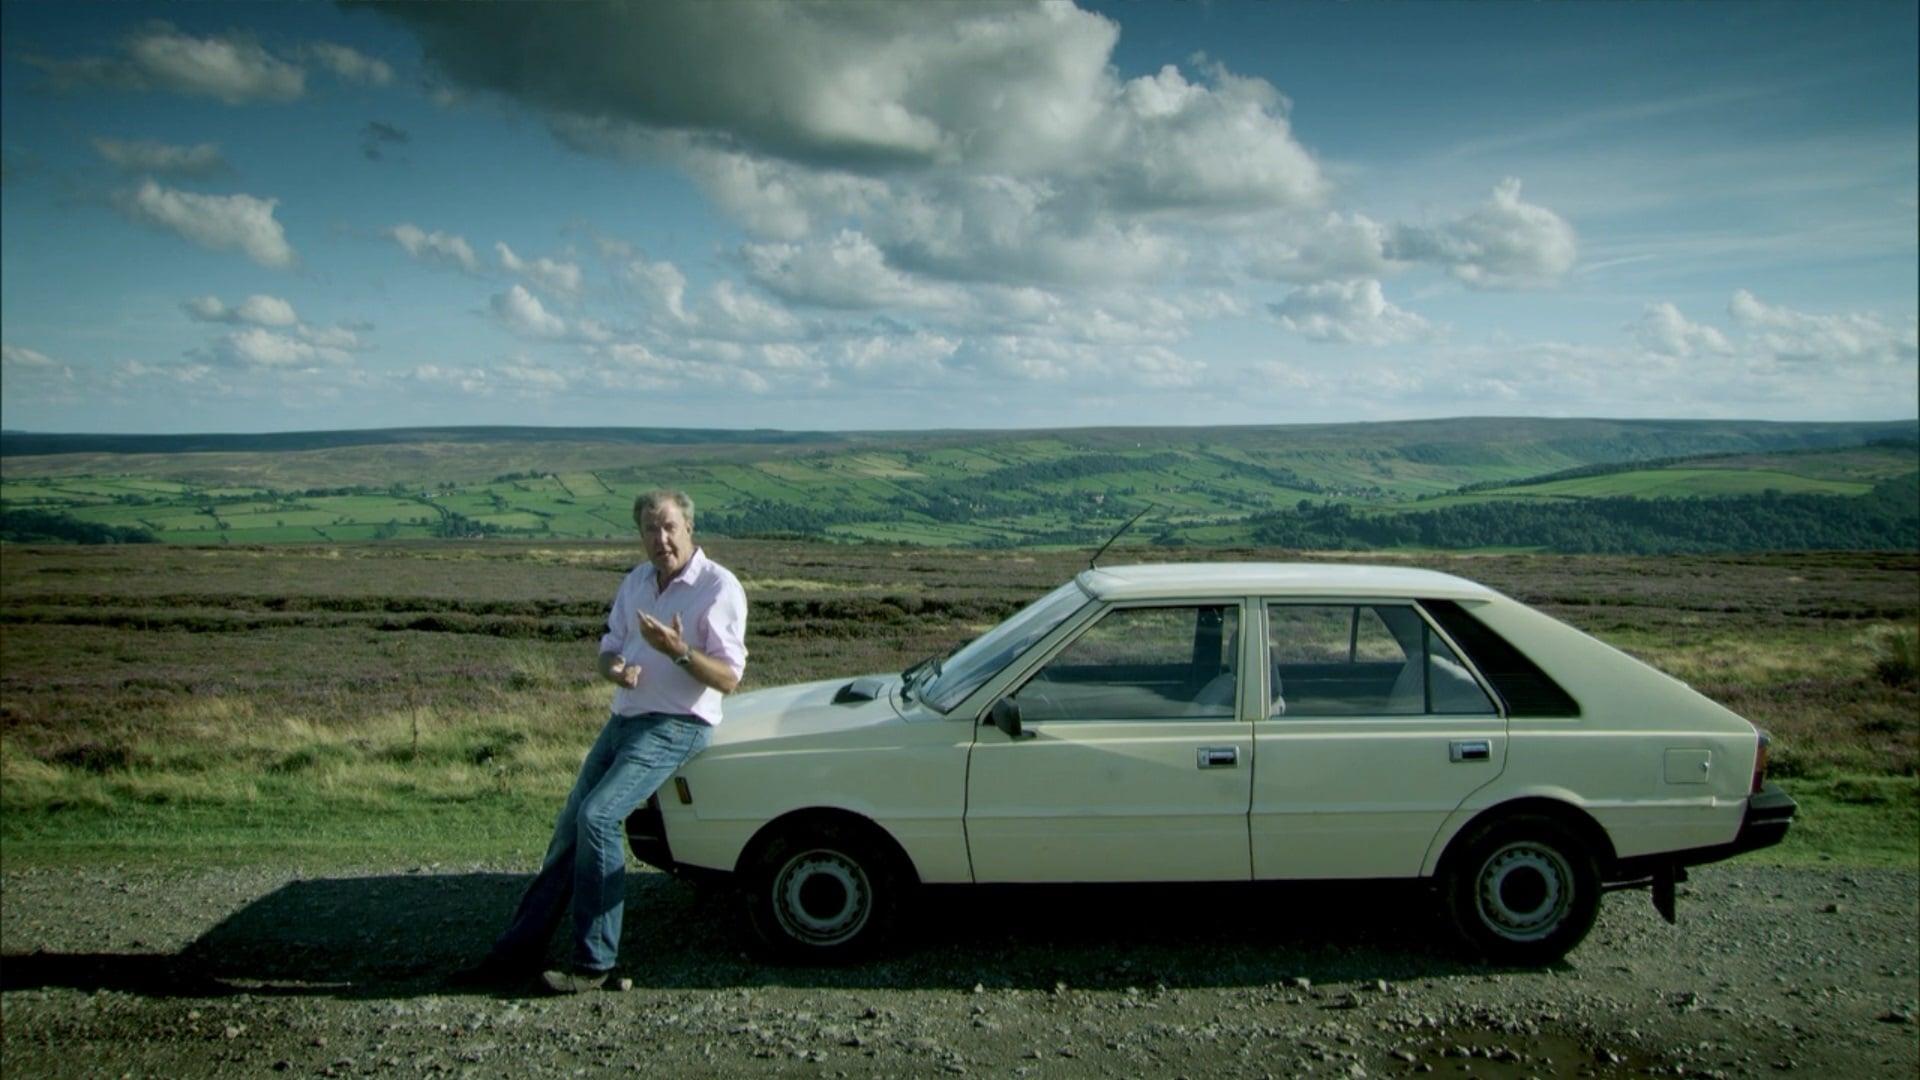 Top Gear: The Worst Car In the History of the World backdrop